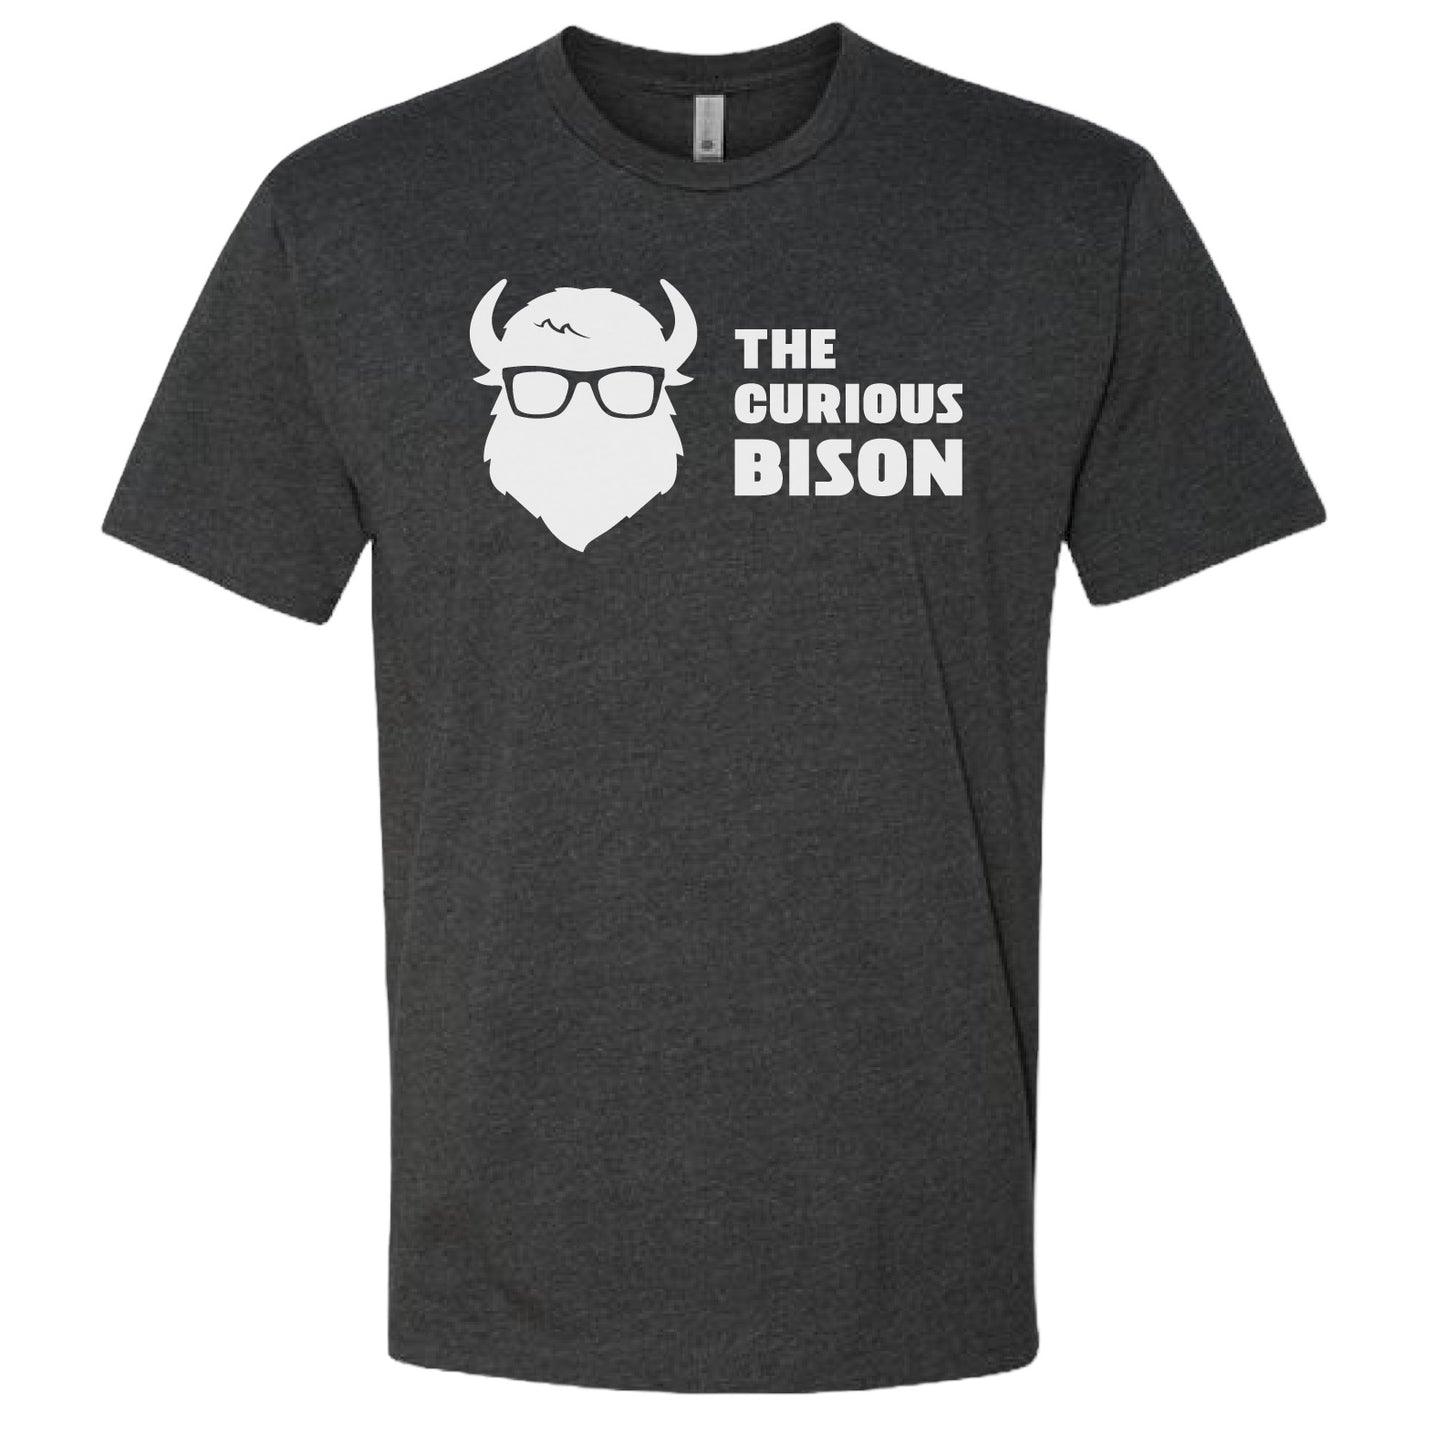 The Curious Bison T-Shirt